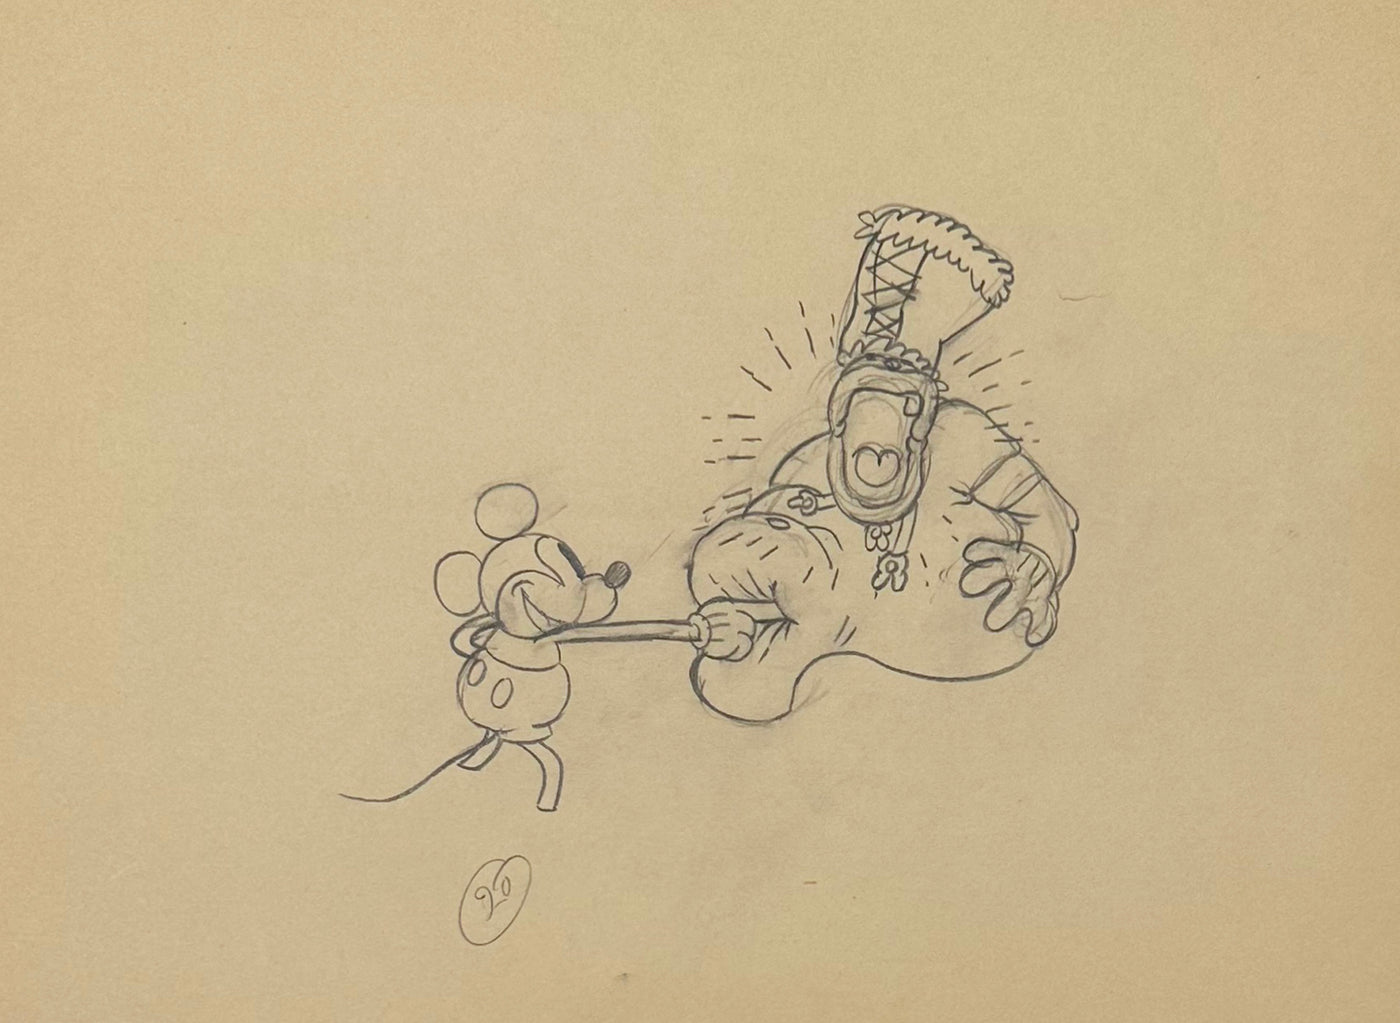 Original Walt Disney Production Drawing from Trader Mickey featuring Mickey Mouse and Chief